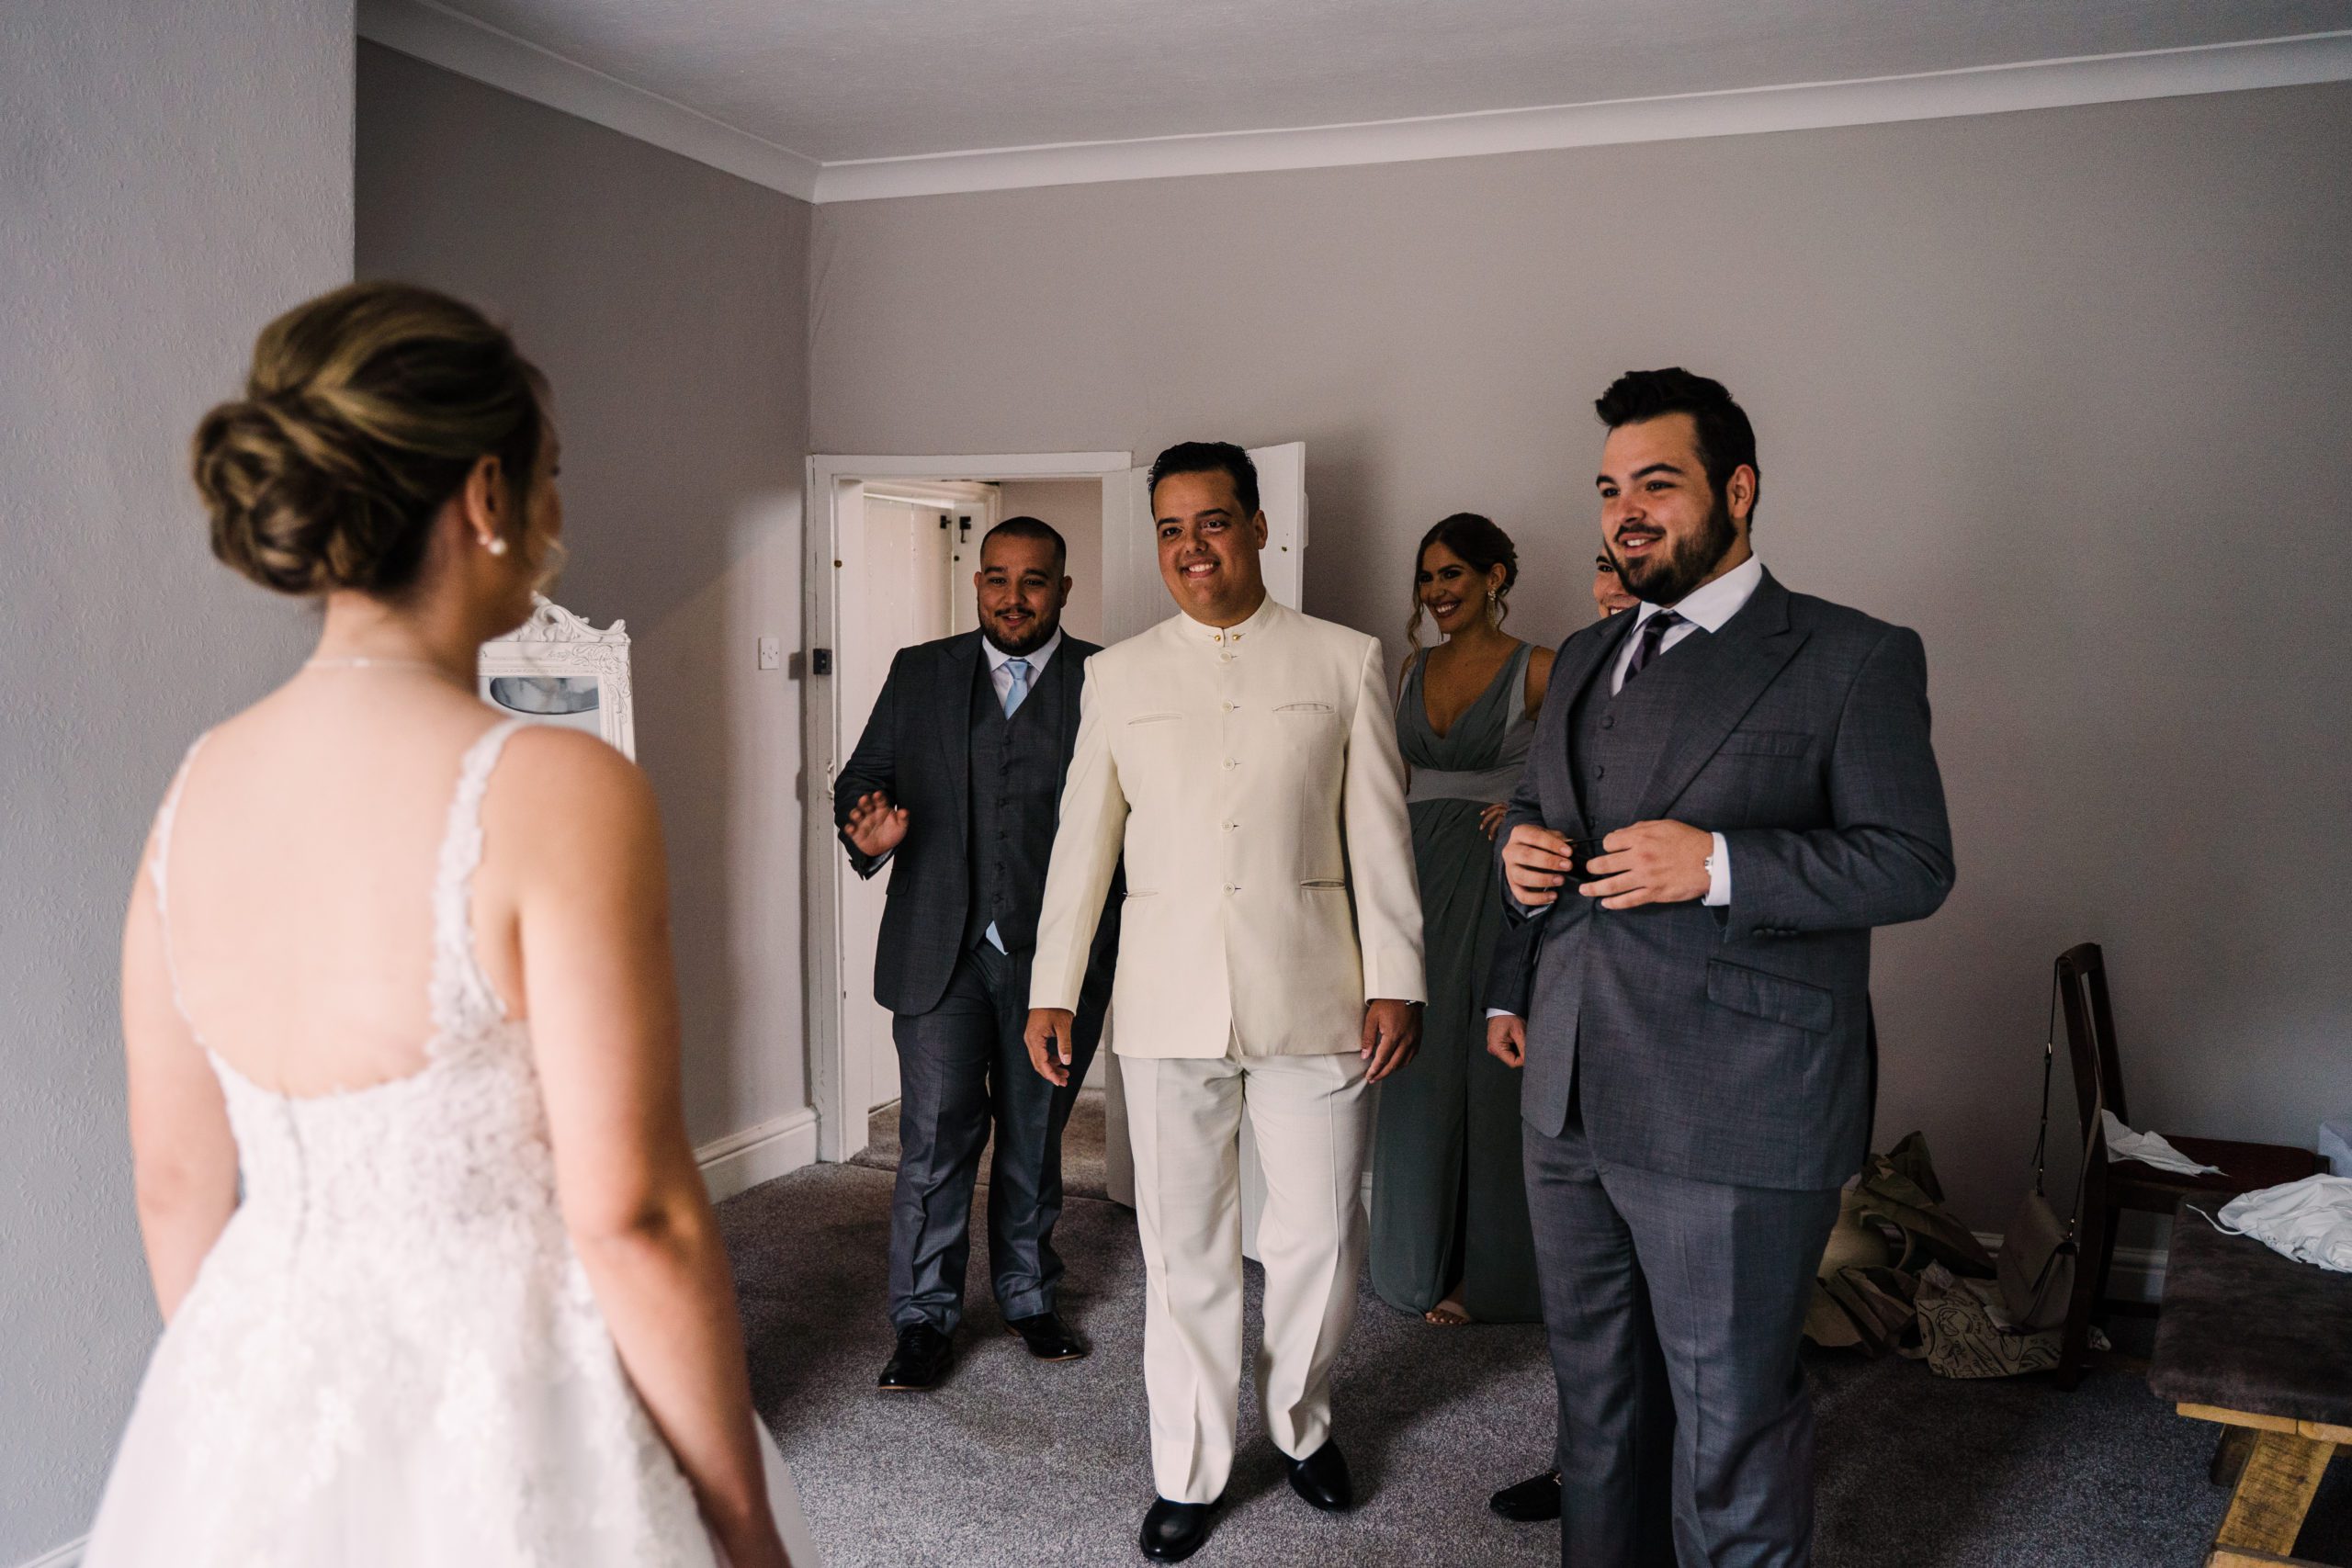 Bride has back to camera as brothers enter room smiling for first look.